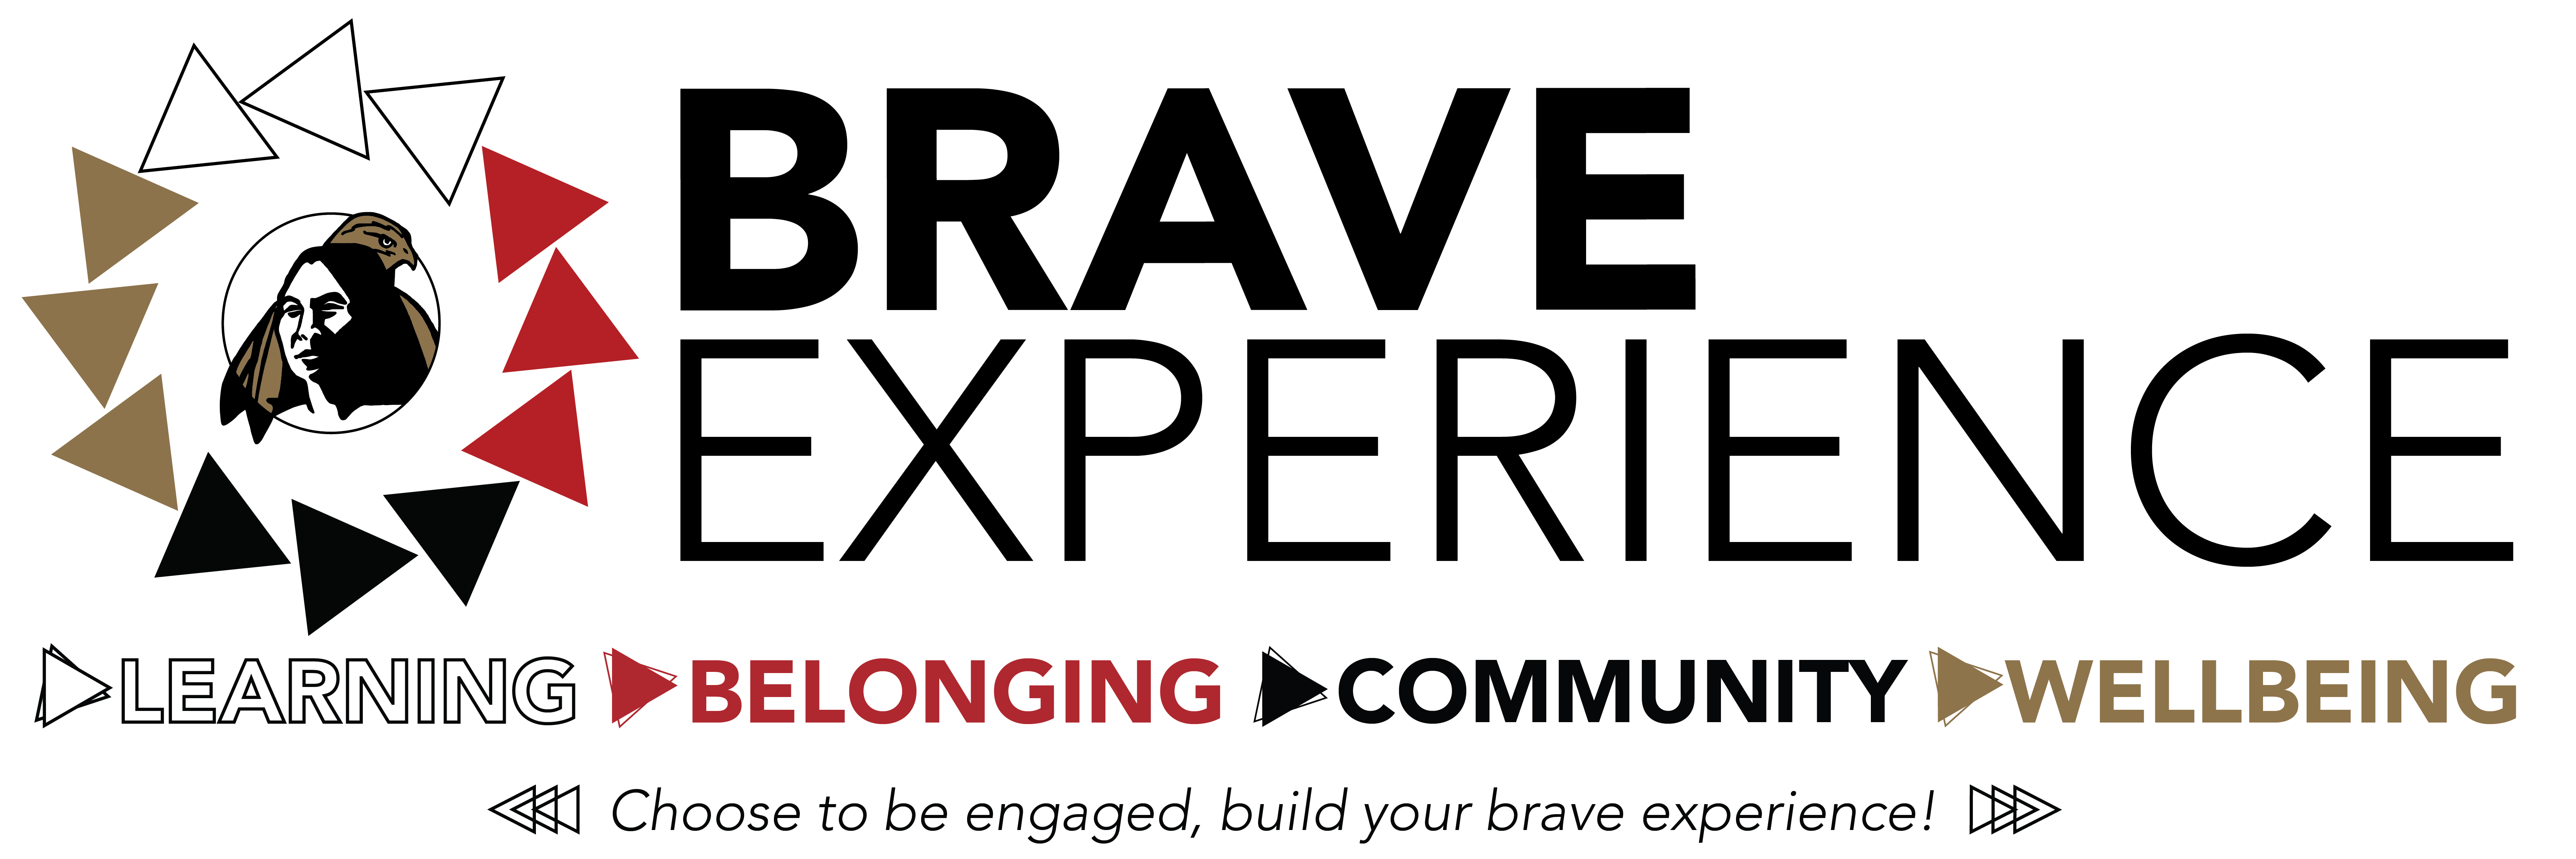 Brave Experience Banner for learning, belonging, community and wellbeing. Choose to be engaged, build your brave experience!